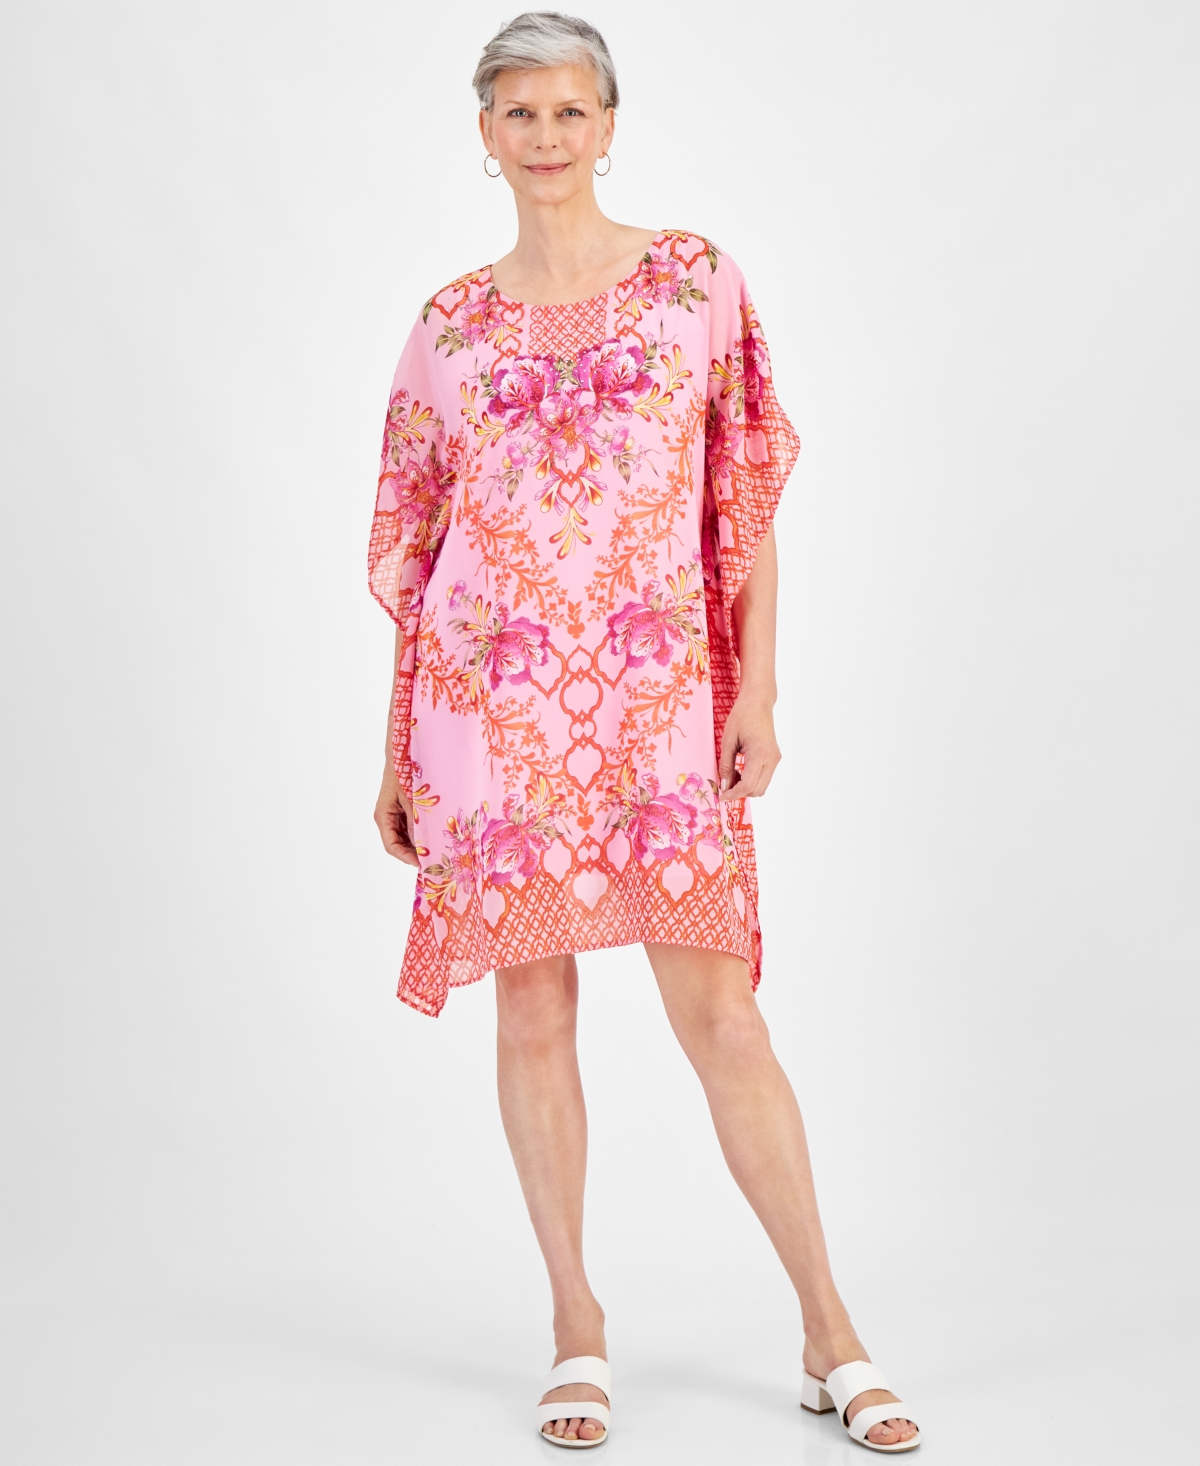 Petite Oasis Dream Embellished Caftan Dress, Created for Macy's - Blossom Berry Combo